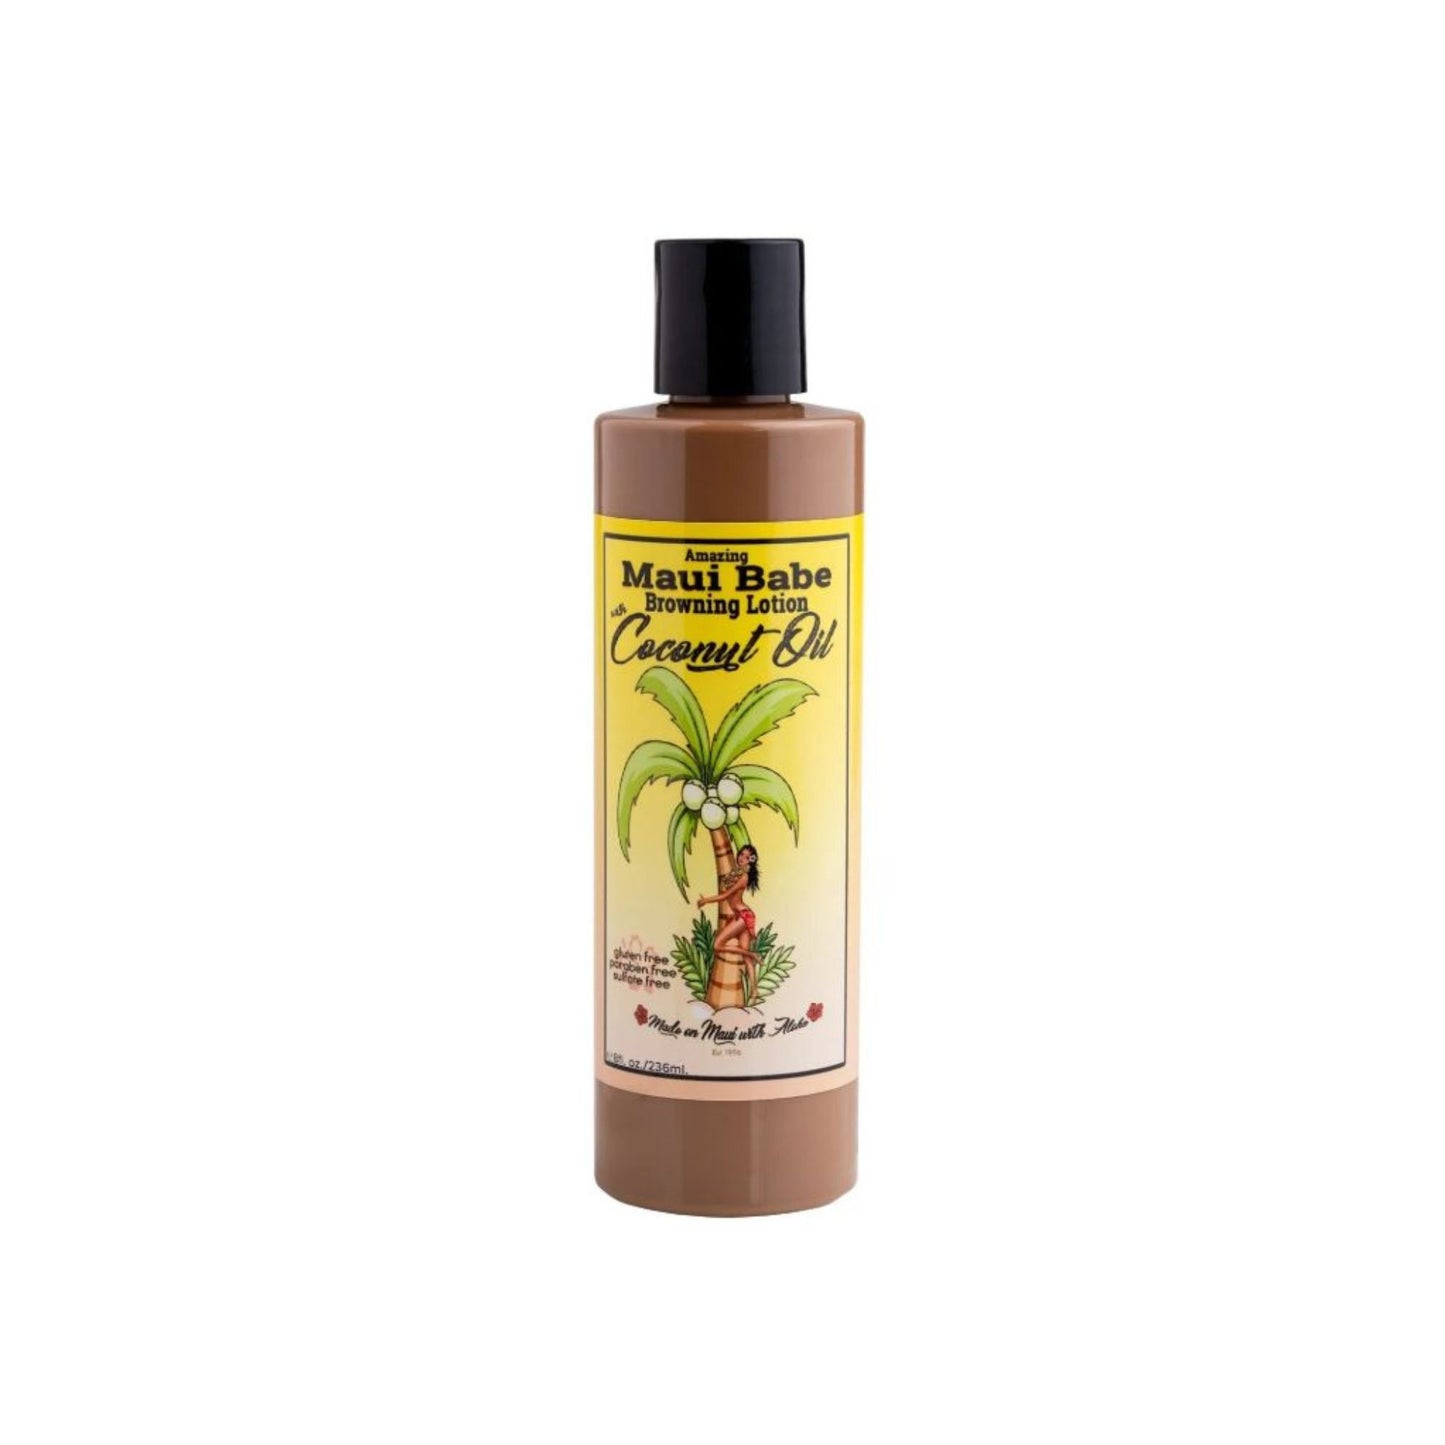 Maui Babe Browning Lotion with Coconut Oil 236ML